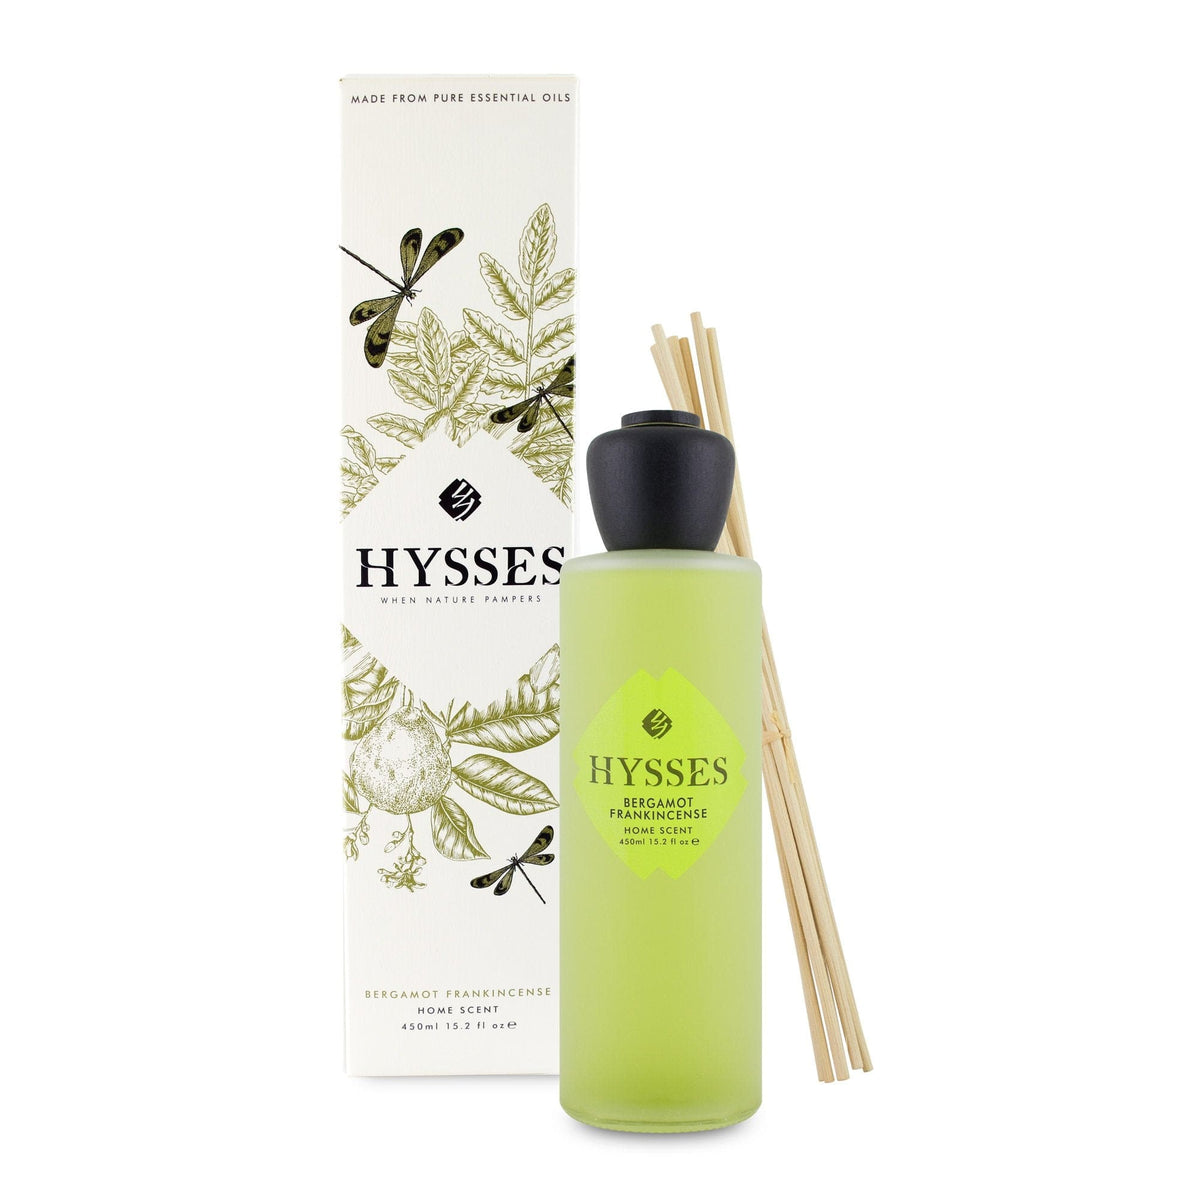 Hysses Home Scents 450ml Home Scent Reed Diffuser Bergamot Frankincense